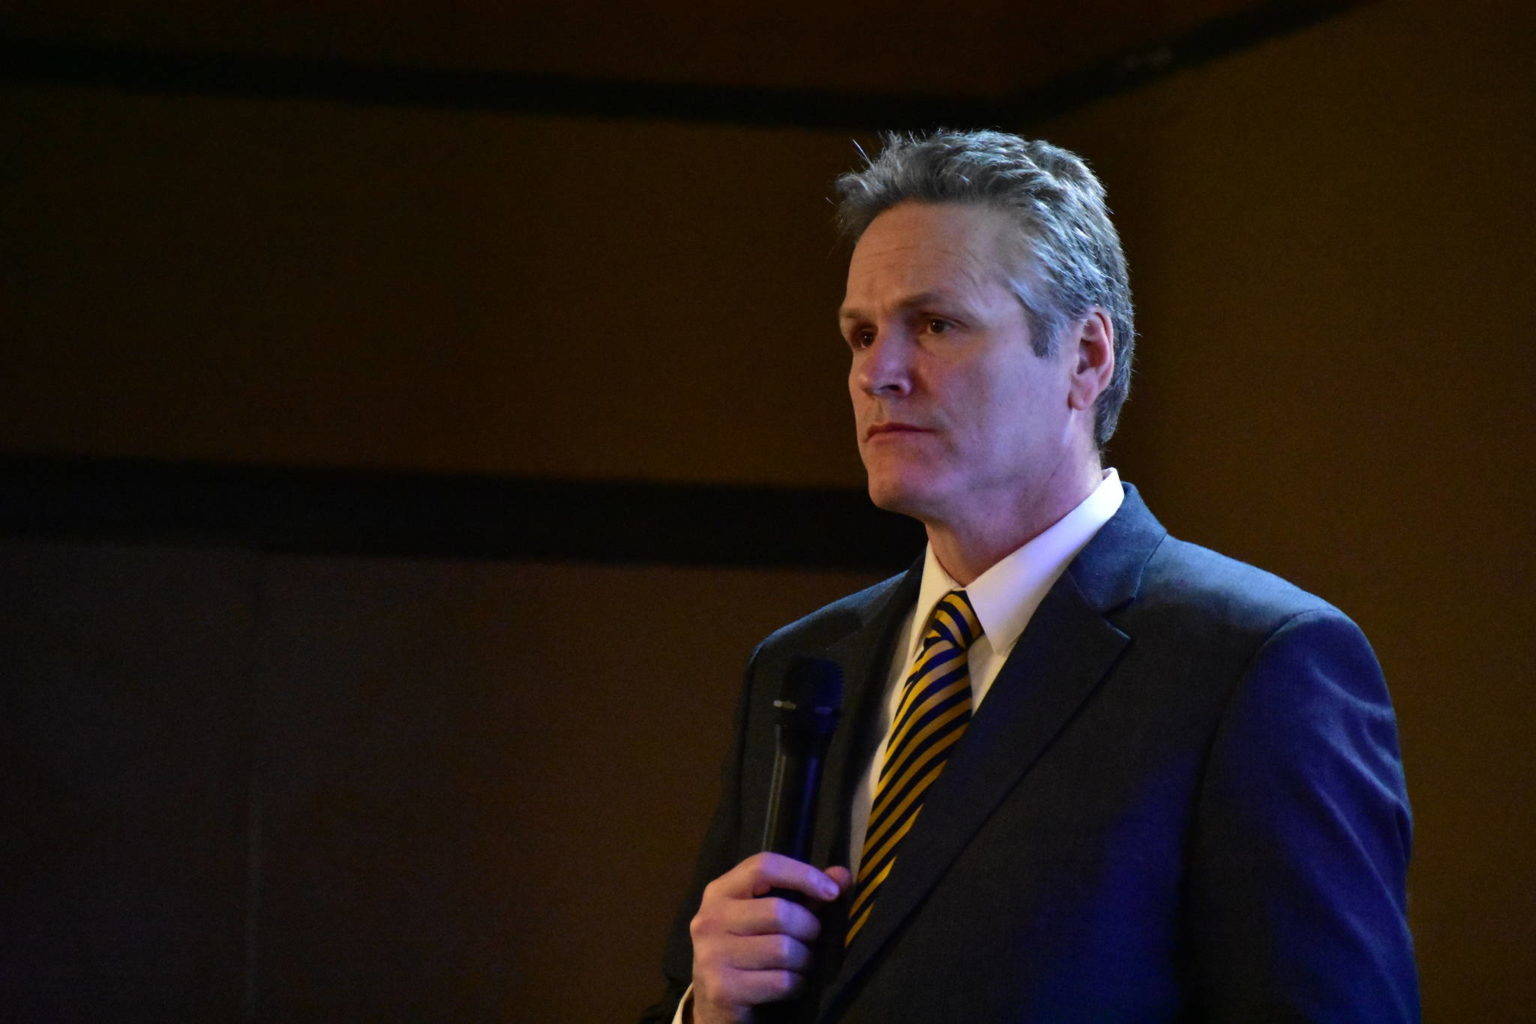 Gov. Mike Dunleavy addresses the public during a virtual town hall on Sept. 15, 2020 in Alaska. Dunleavy went into self-quarantine Monday following news a close contact had tested positive for COVID-19. (Courtesy Photo / Office of the Governor)